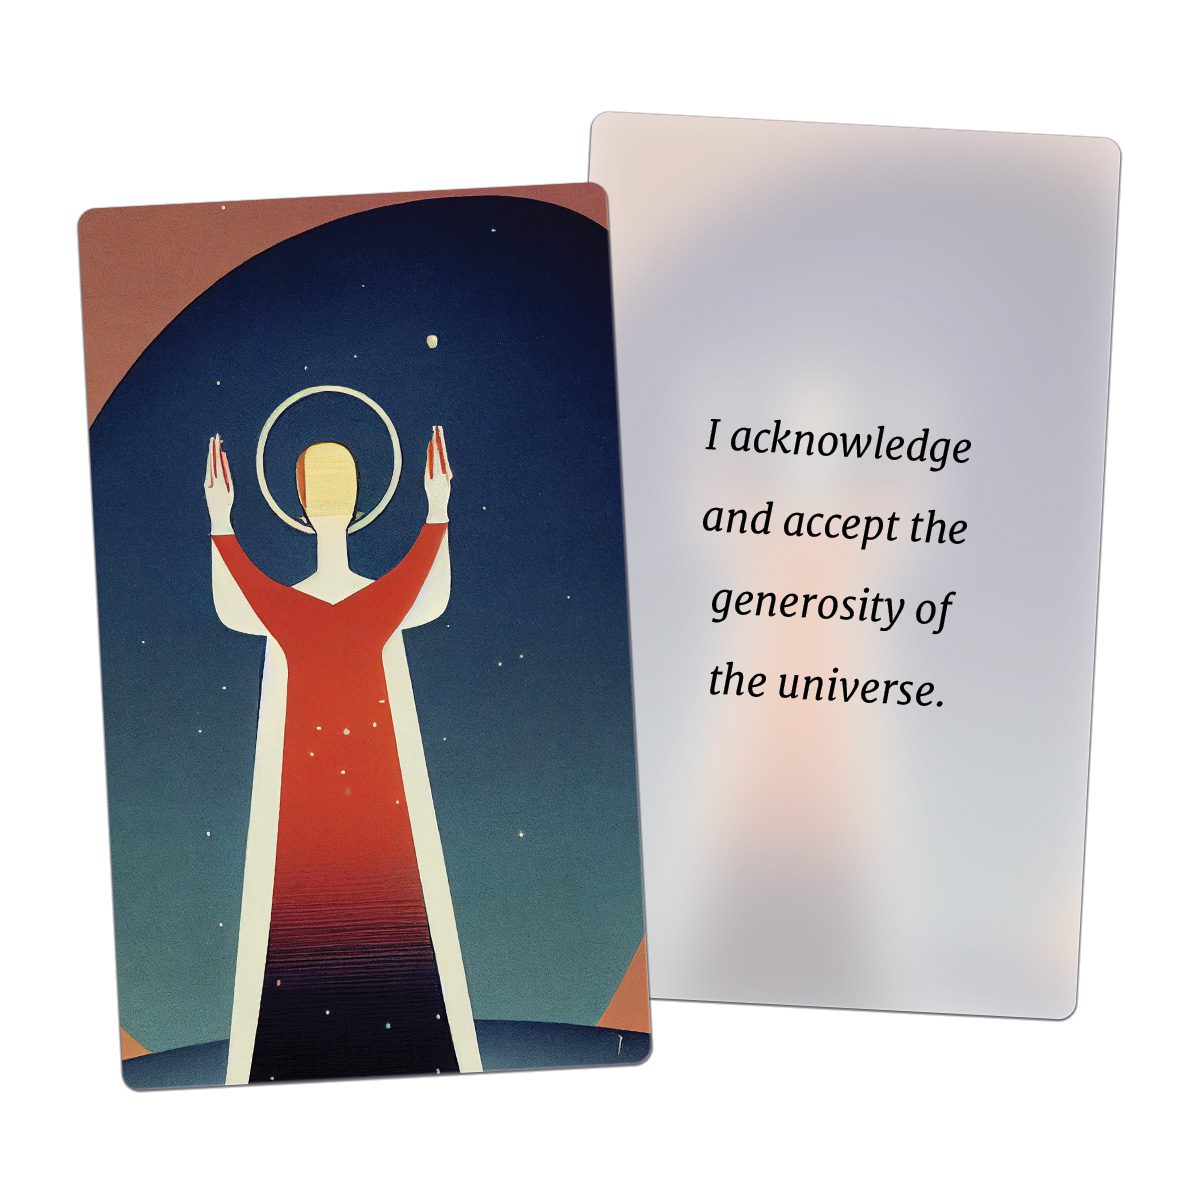 I acknowledge and accept the generosity of the universe.